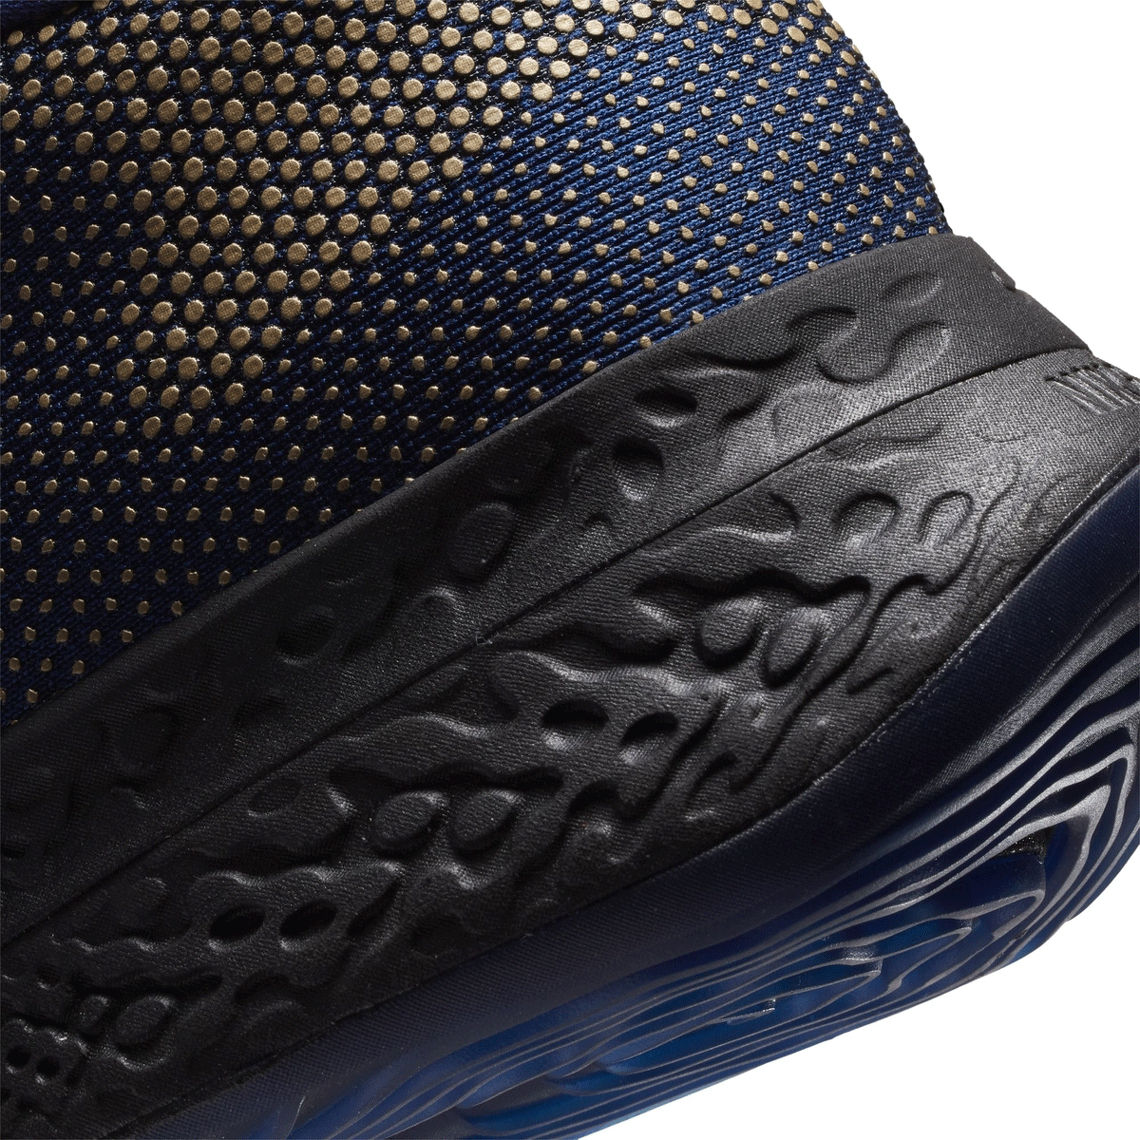 Nike Air Zoom BB NXT Navy Gold Release Date | SneakerNews.com